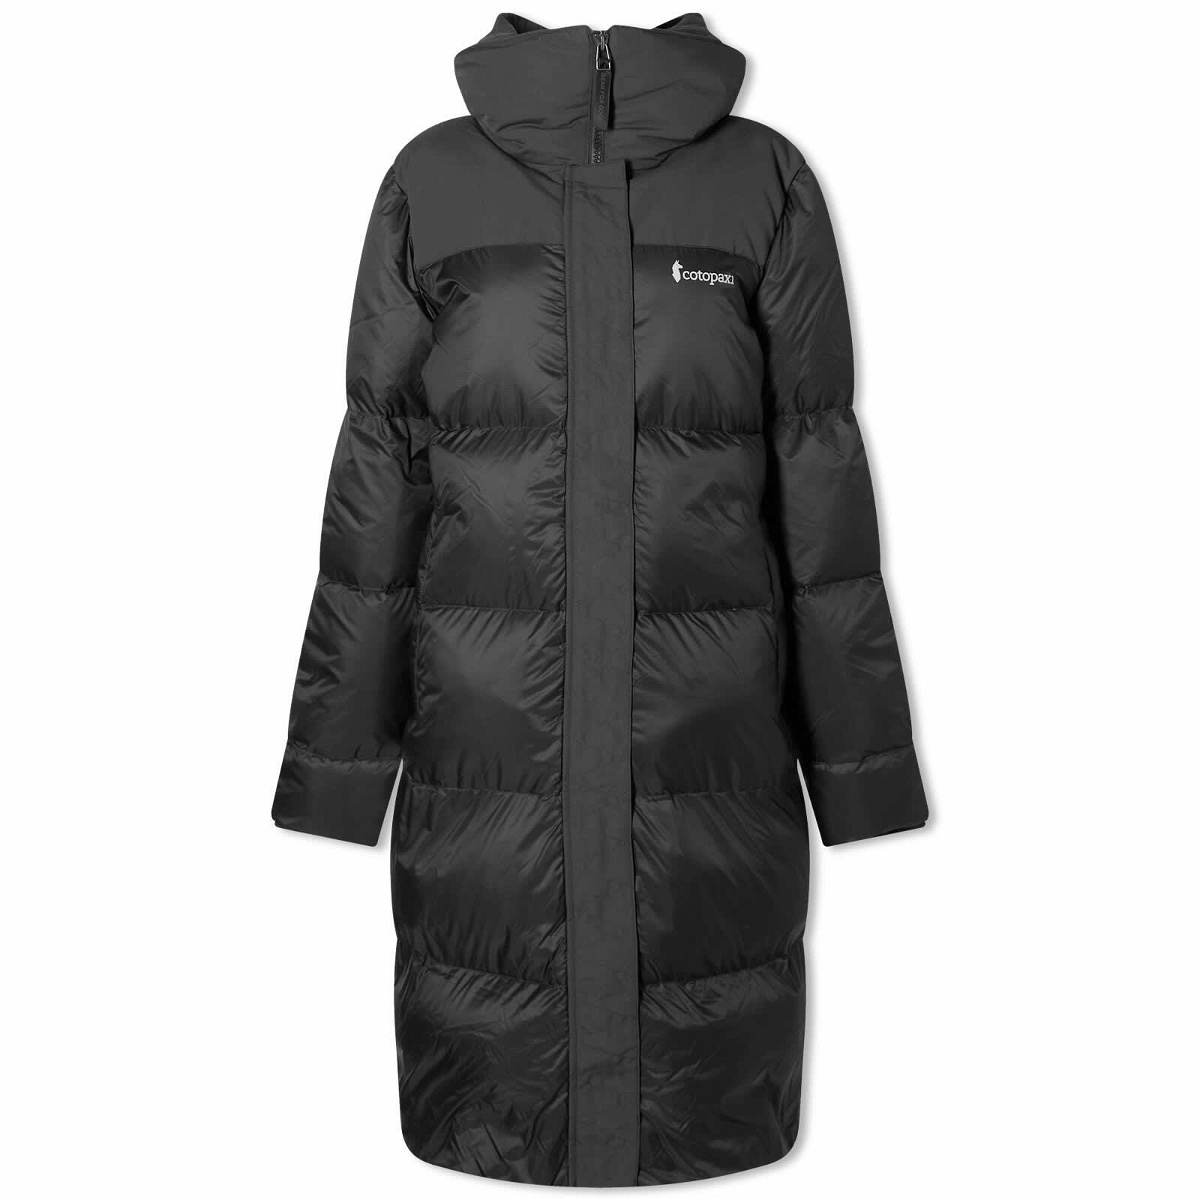 Cotopaxi Women's Solazo Down Parka Jacket in All Black Cotopaxi